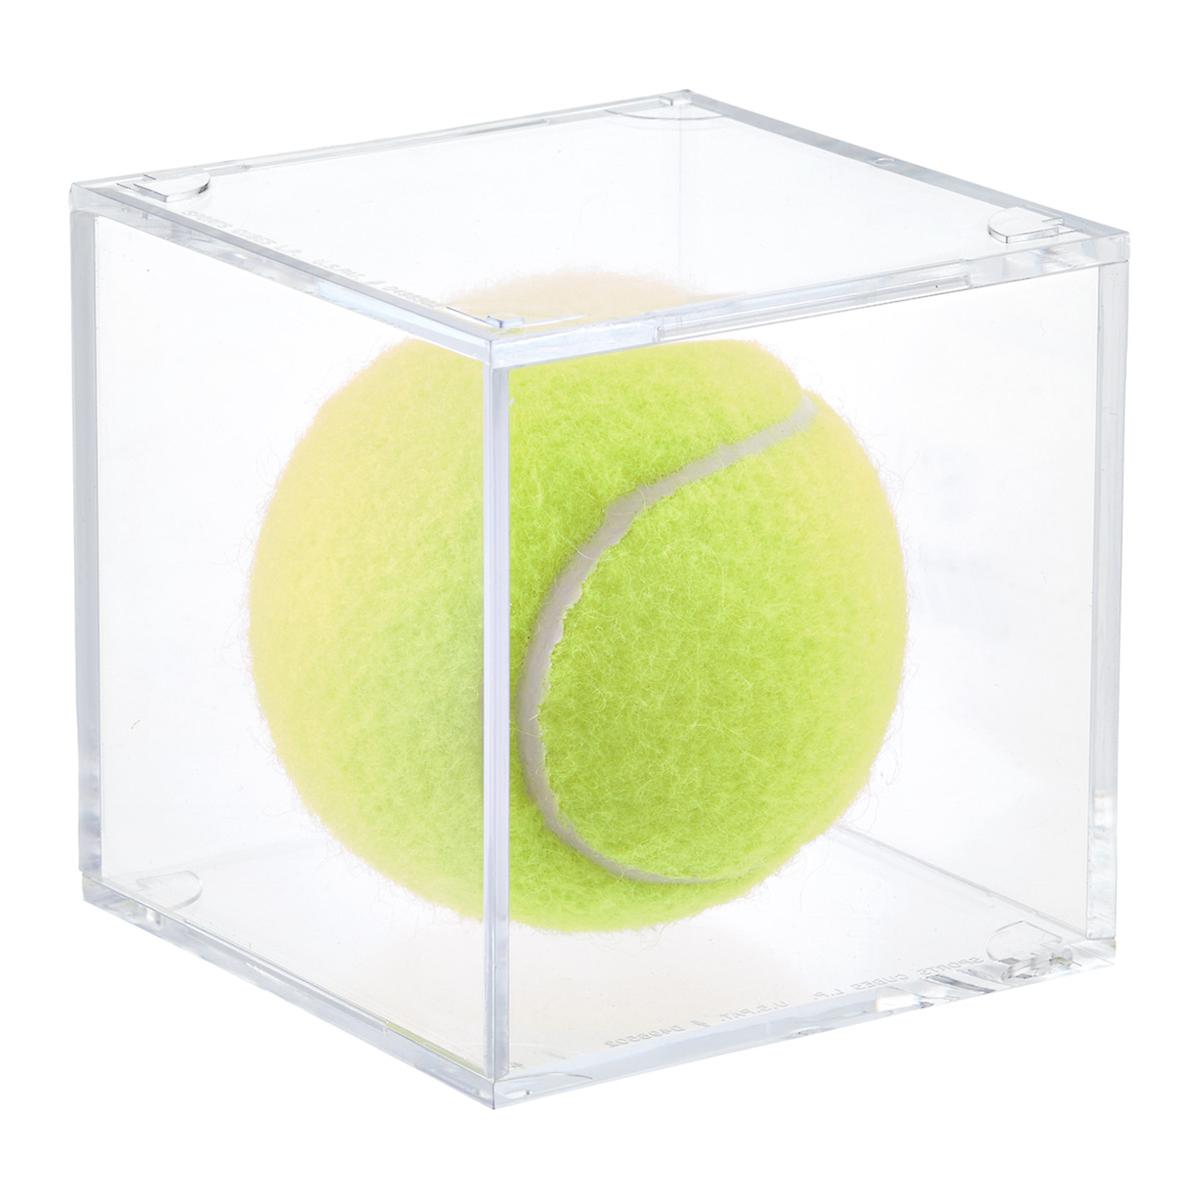 Small Ball & Puck Display Cubes | The Container Store